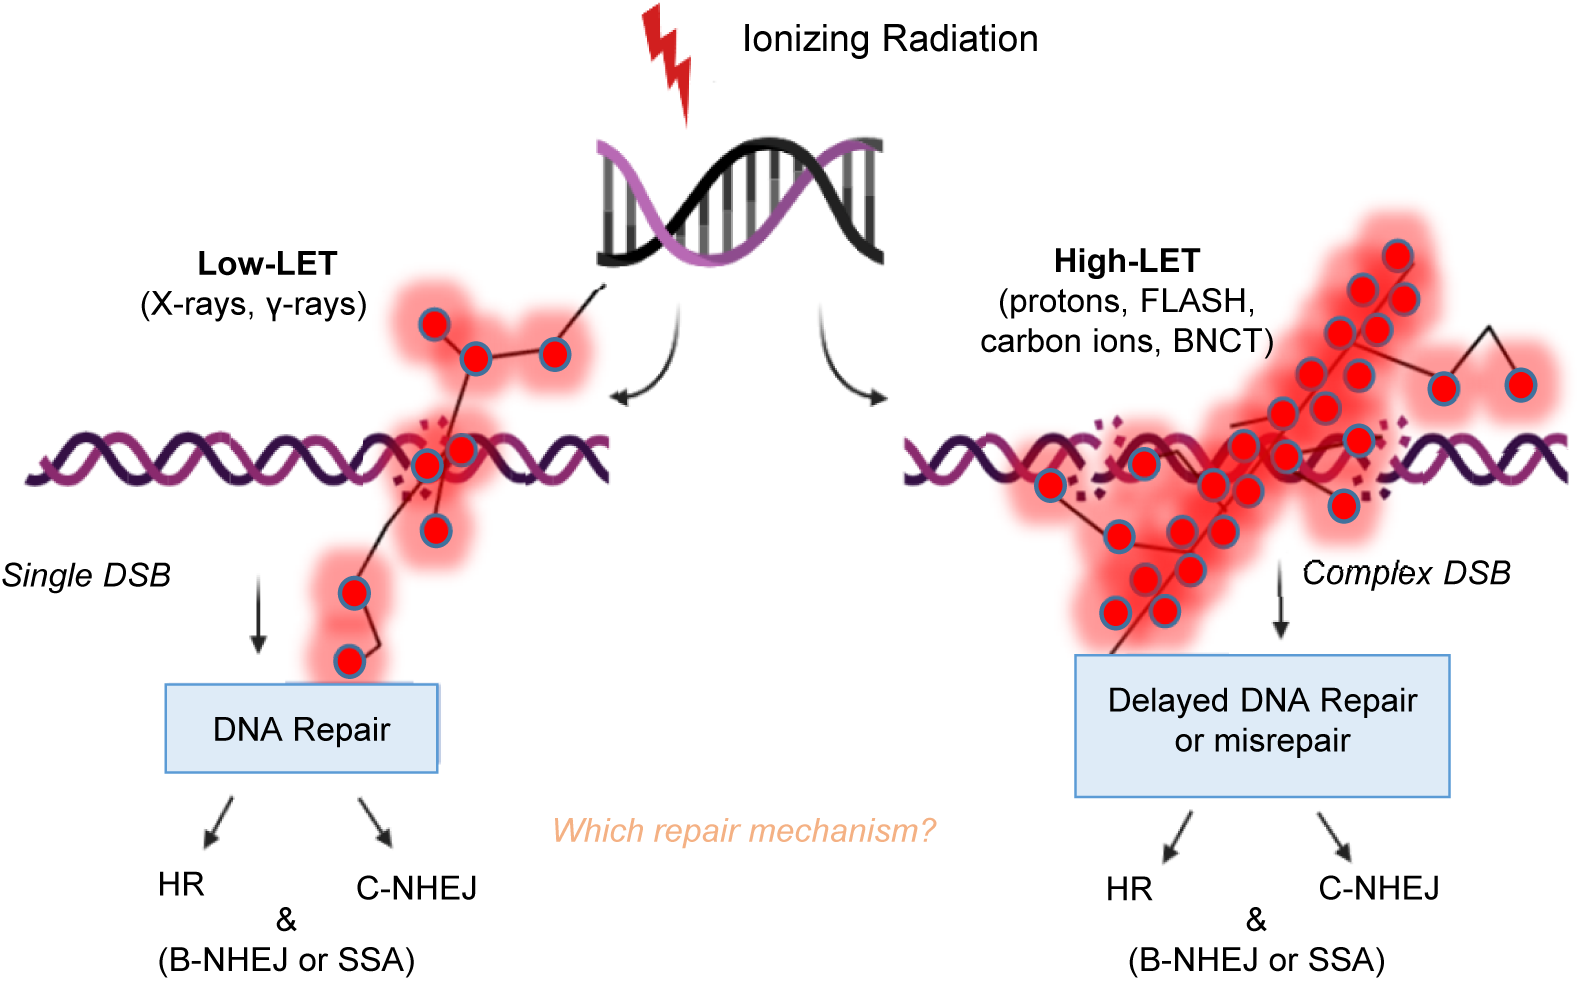 Key biological mechanisms involved in highLET radiation therapies with